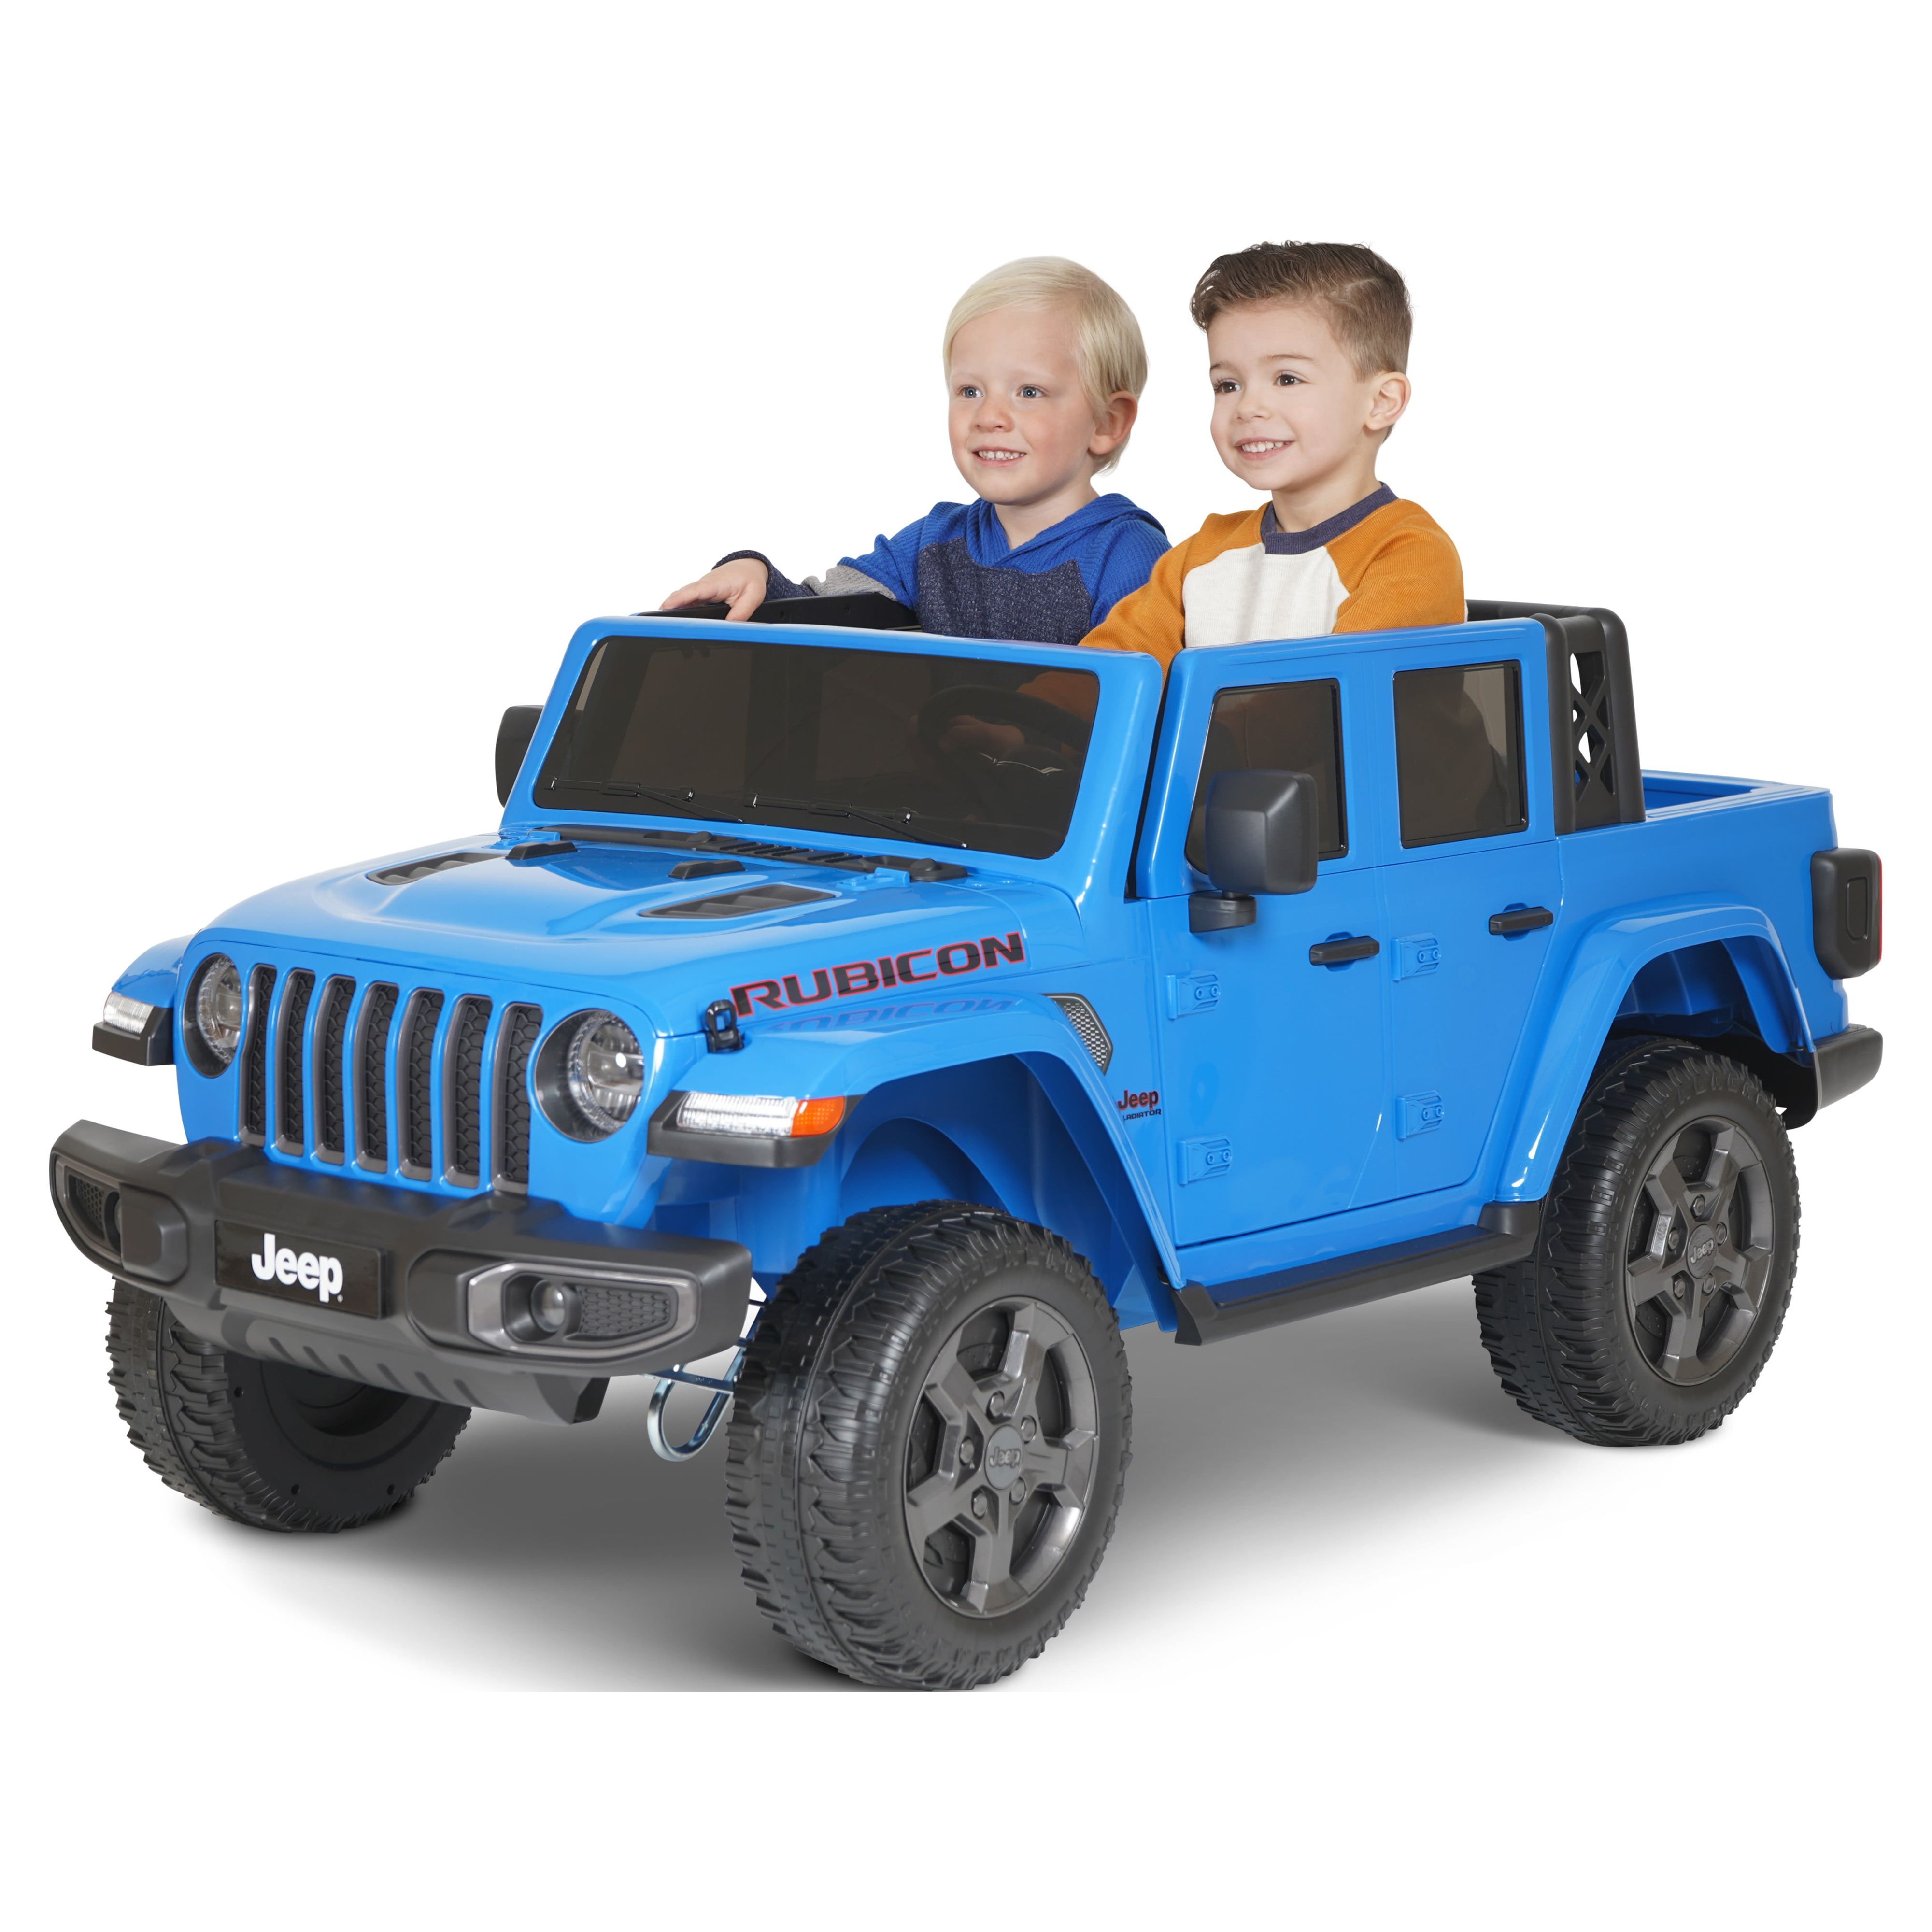 12V Jeep Gladiator Rubicon Battery Powered Ride-on by Hyper Toys, 2-Seater, Blue, for a Child Ages 3-8, Max Speed 5 mph - image 1 of 18